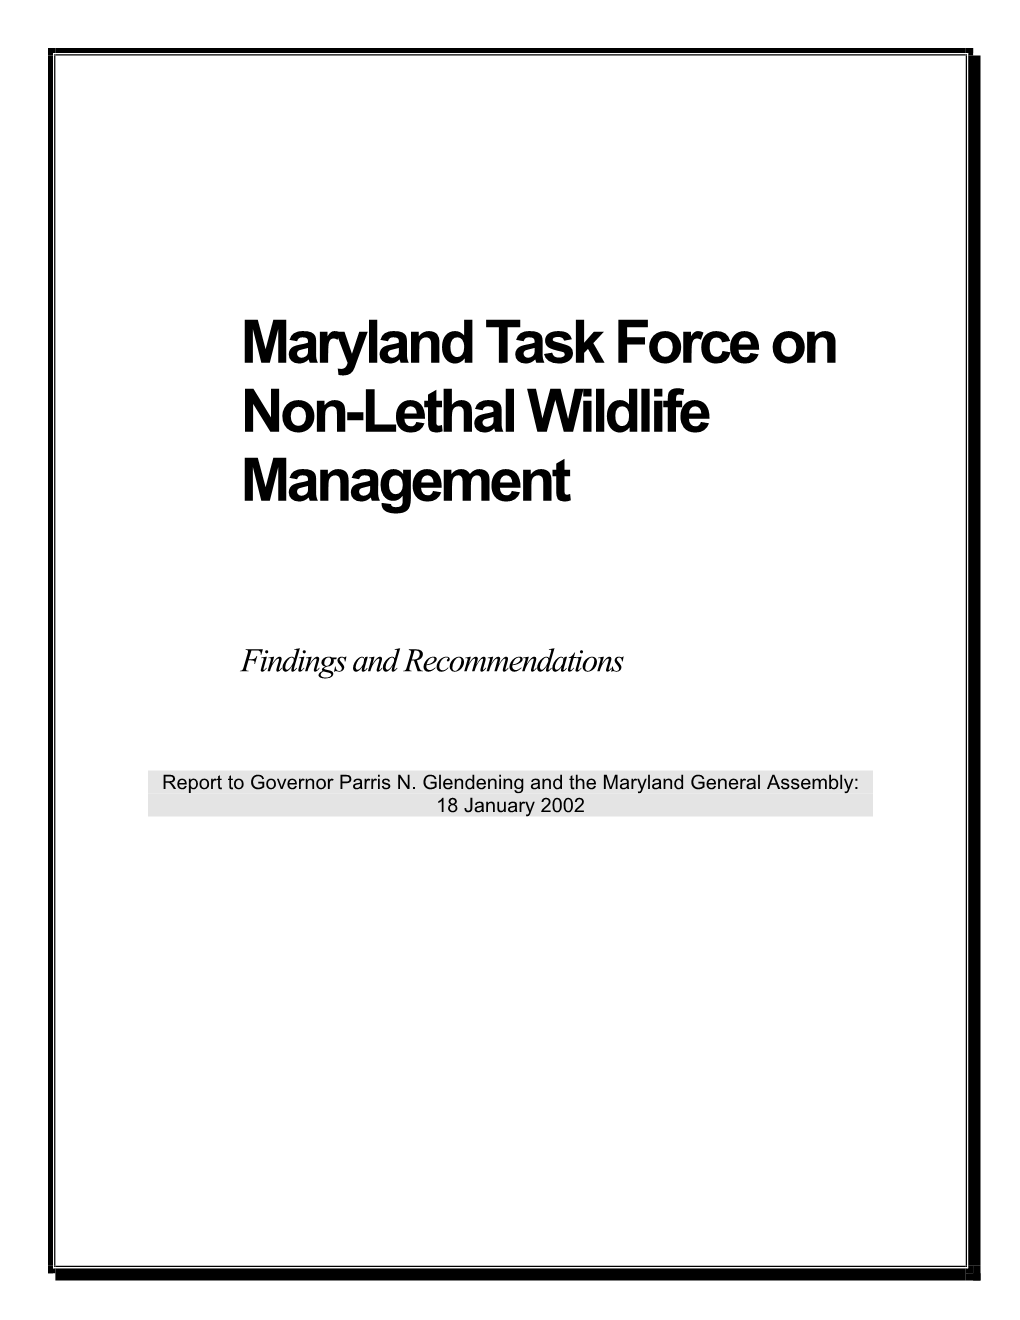 The Maryland Non-Lethal Task Force Was Created Via a Memorandum Of